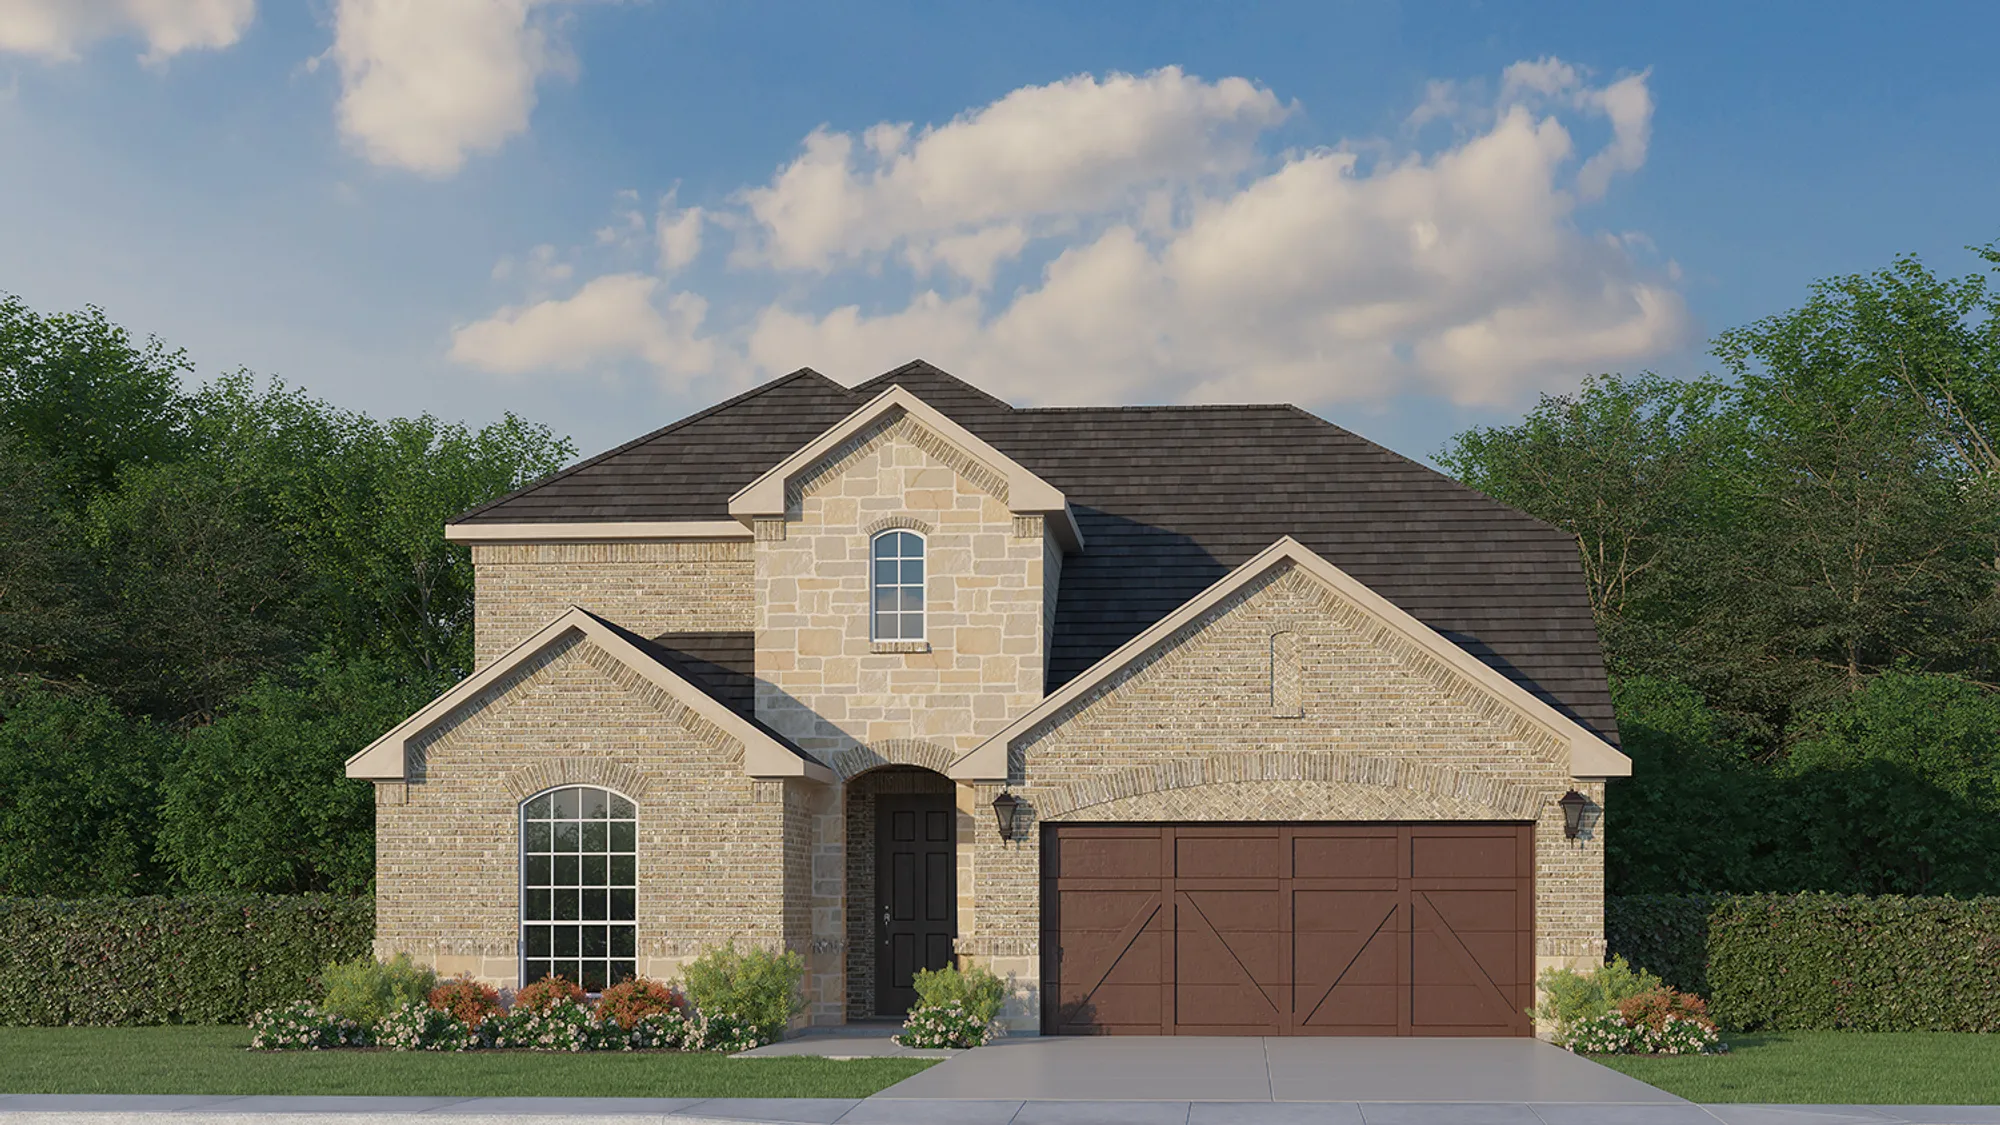 Plan 1525 Elevation A with Stone by American Legend Homes